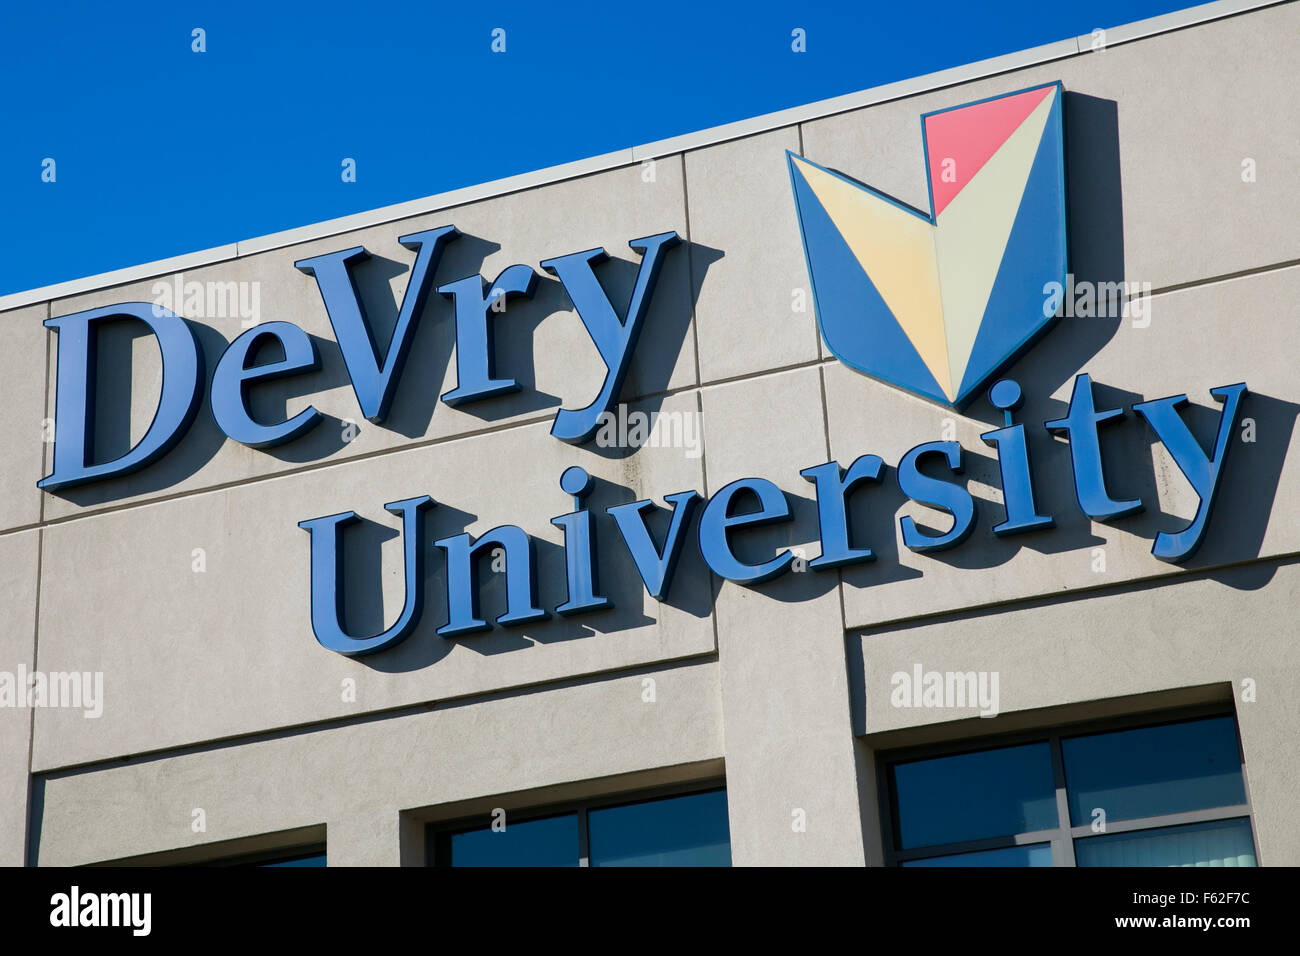 A logo sign outside of a facility occupied by DeVry University in Fort Washington, Pennsylvania on November 8, 2015. Stock Photo